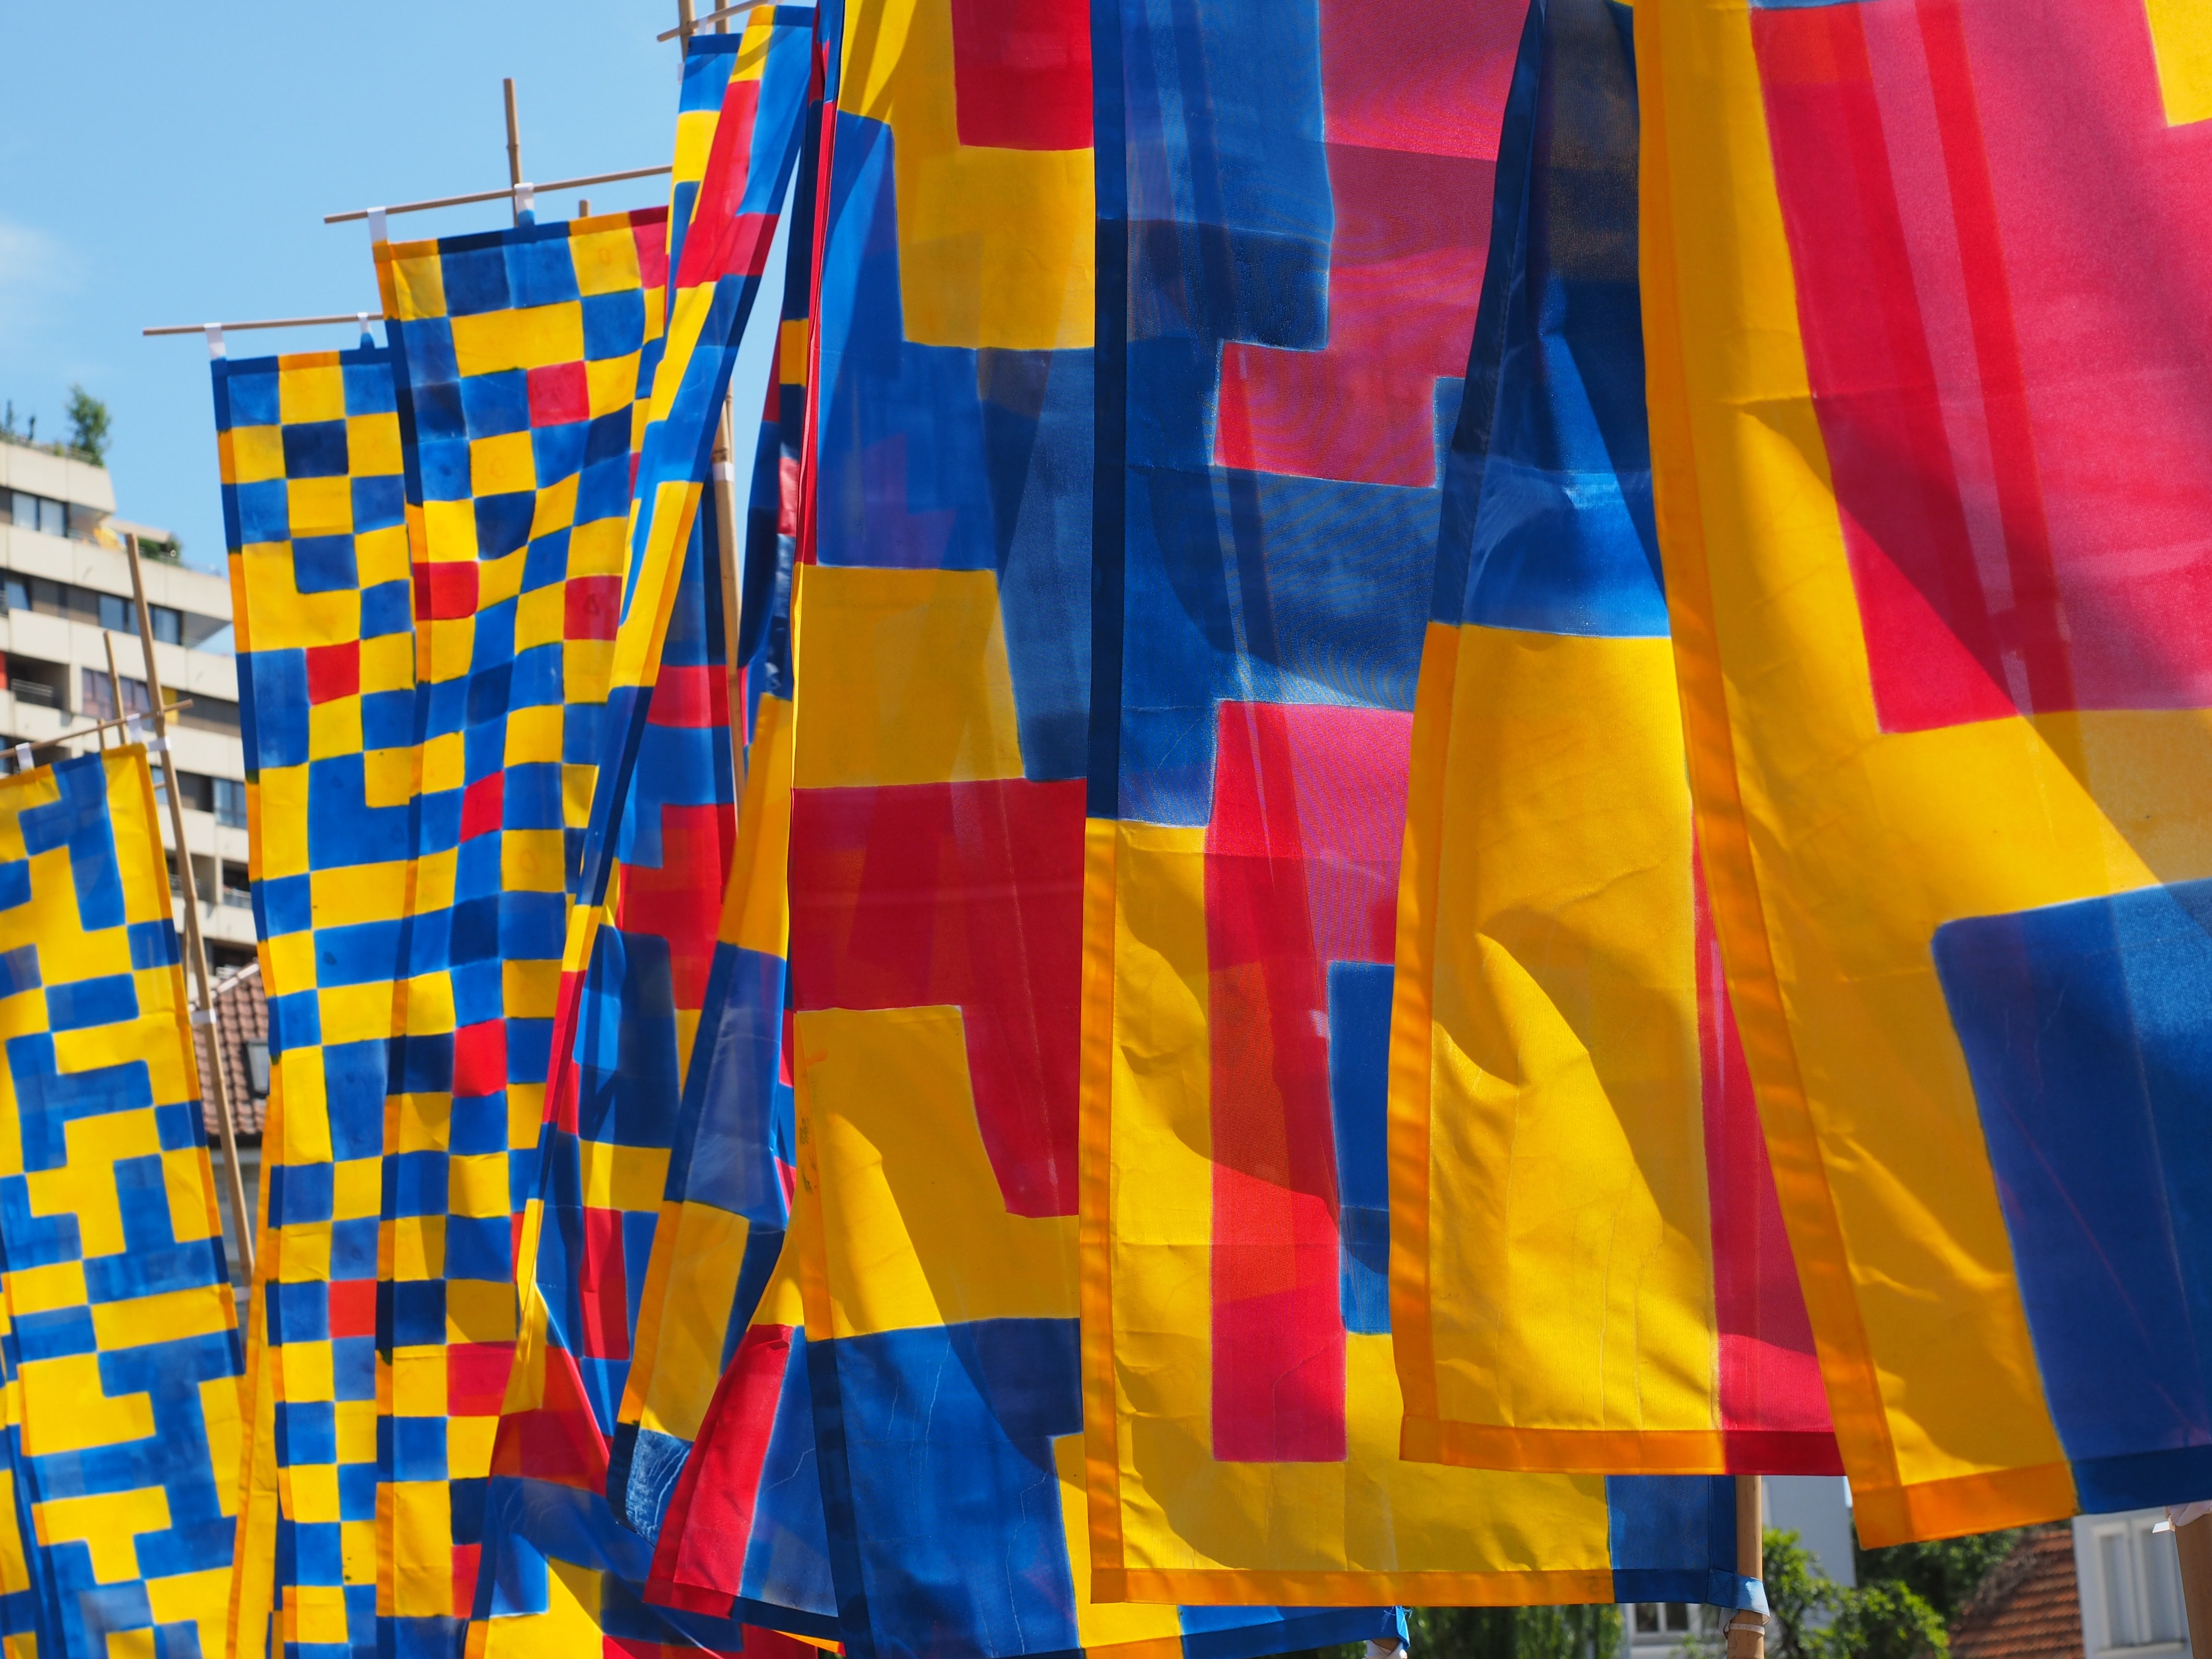 yellow-red-and-blue textiles